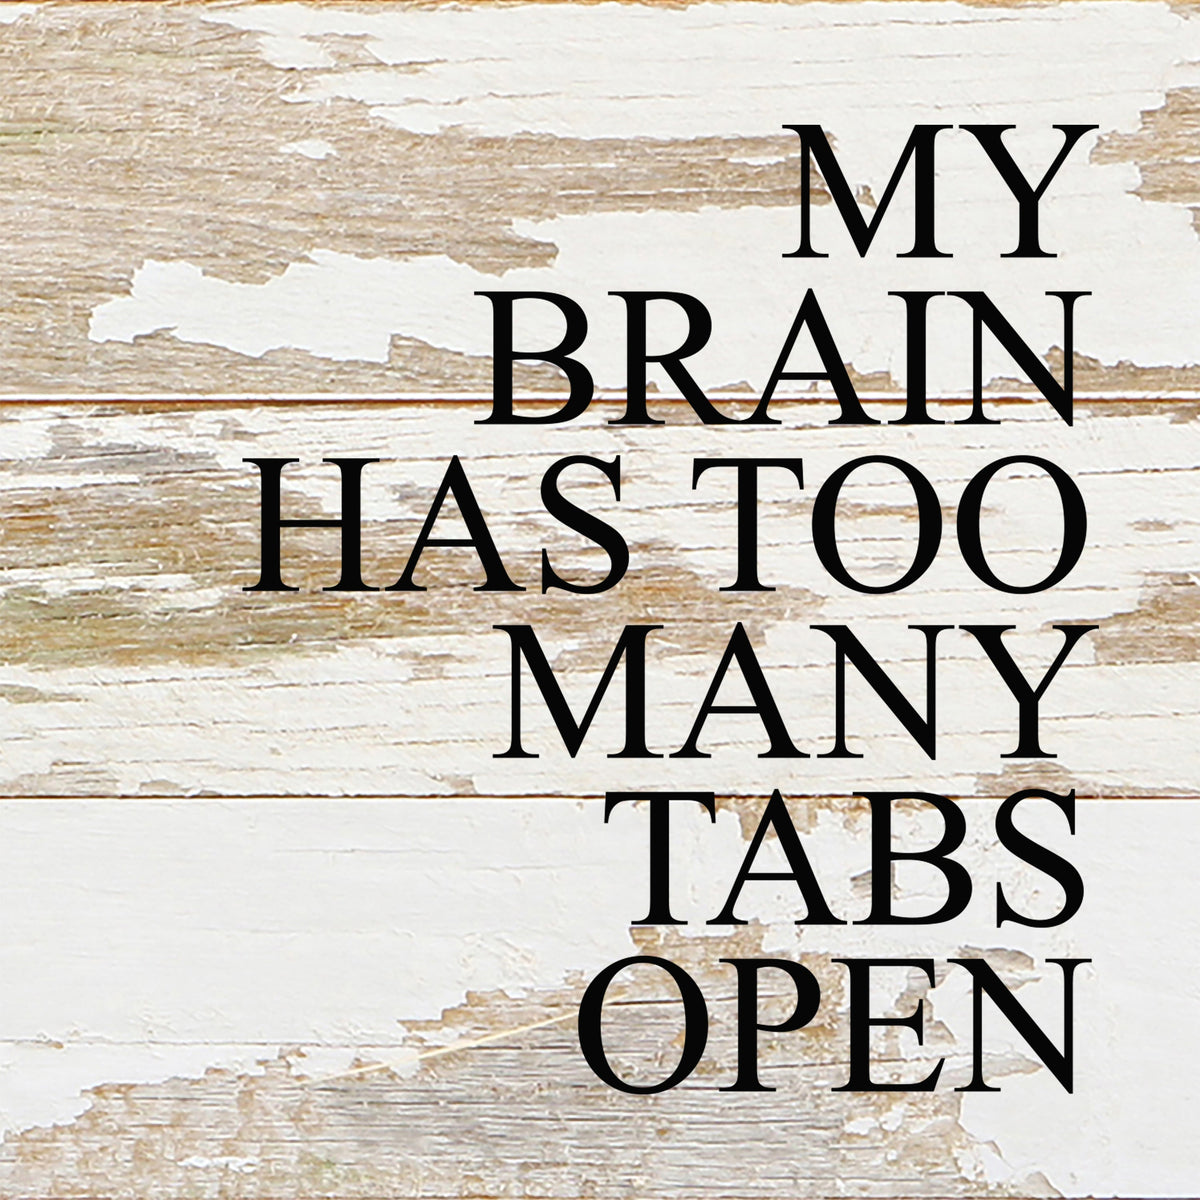 My brain has too many tabs open. / 6"x6" Reclaimed Wood Sign